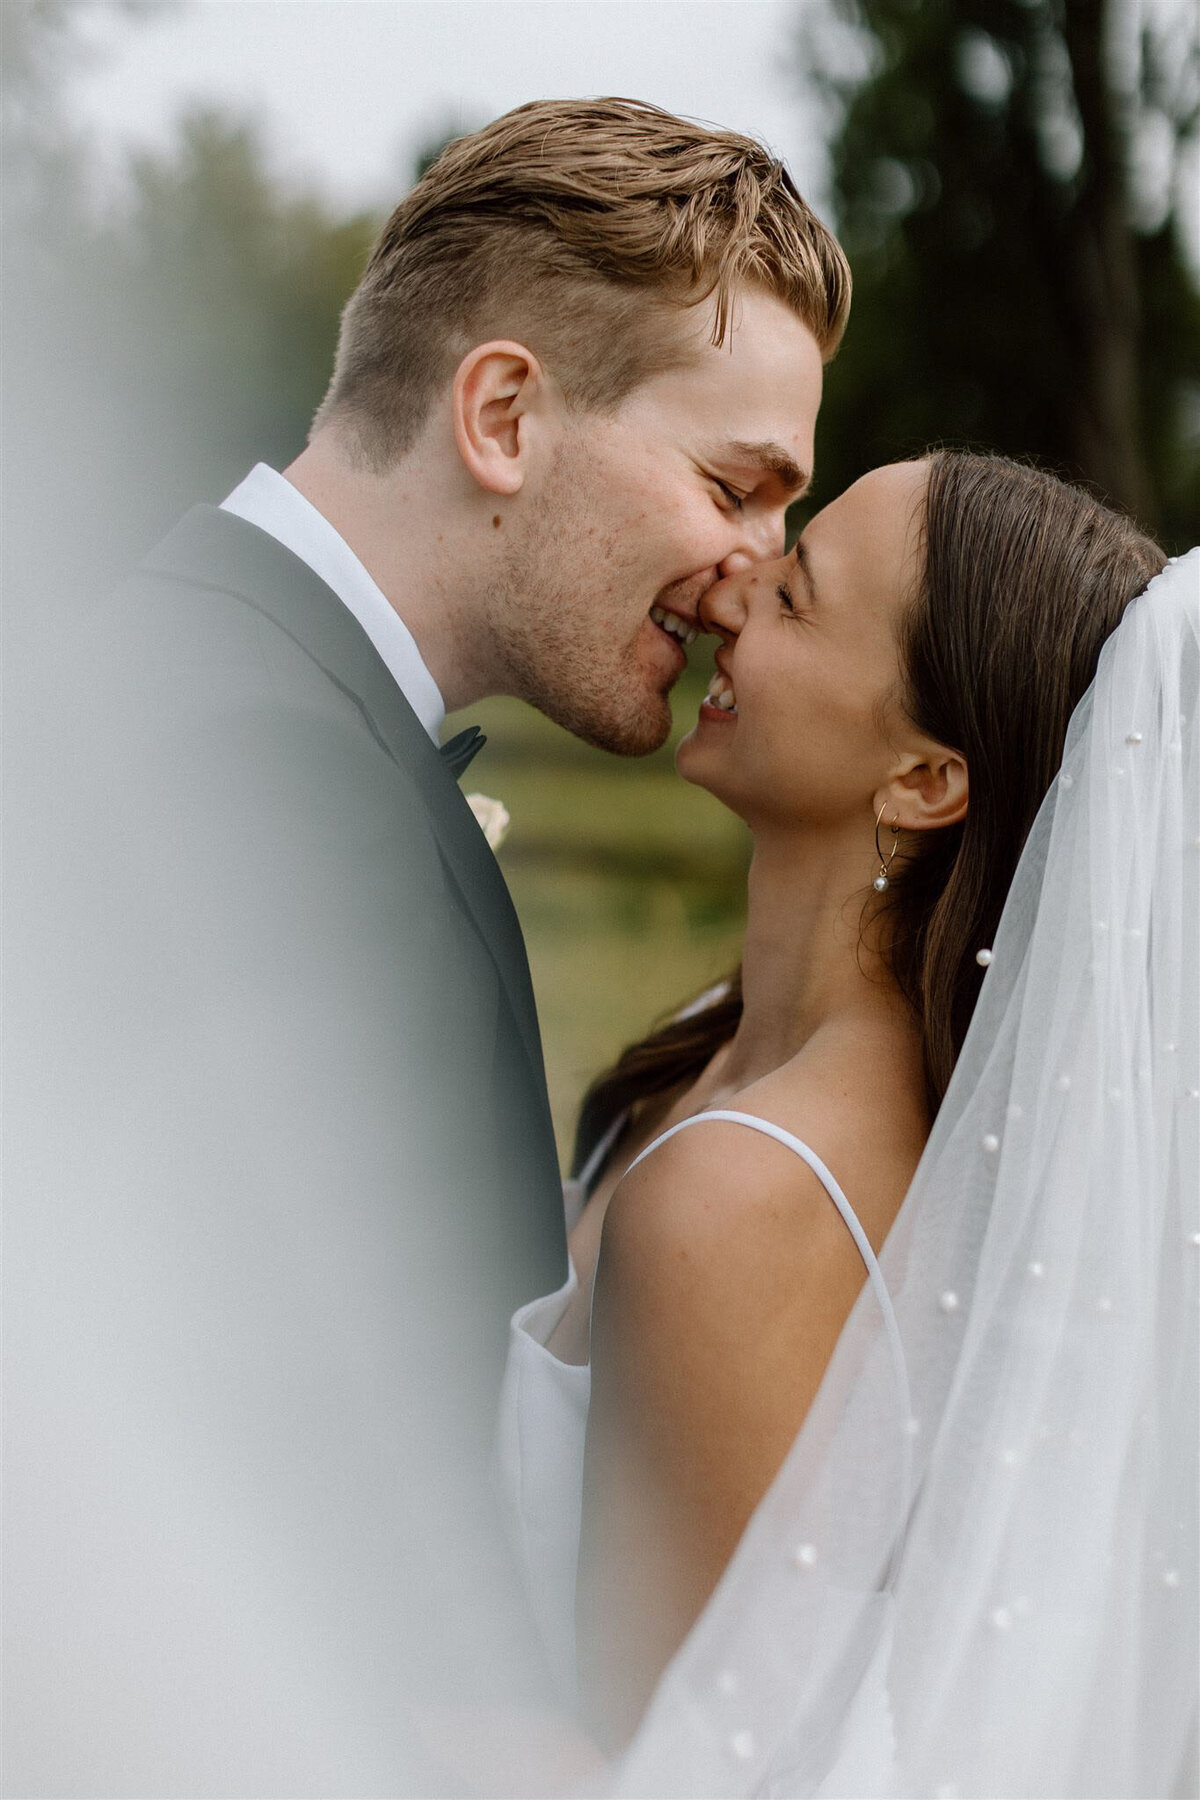 Gorgeous bride and groom portrait by Bronte Taylor Photography, a Vancouver-based photographer with a playful, genuine and intimate approach.